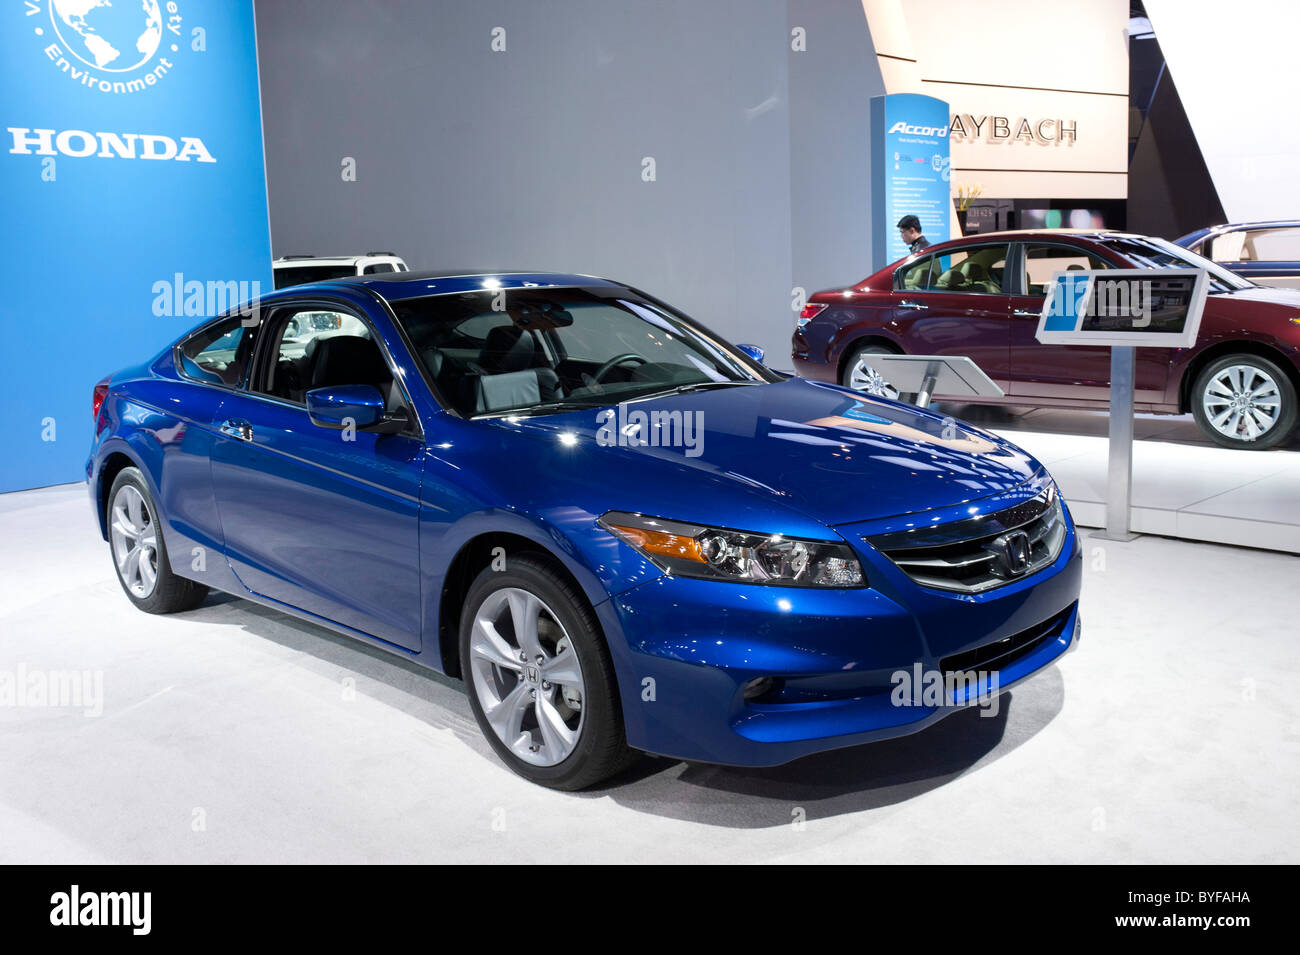 2011 Honda Accord 2-door at the 2011 North American International Auto Show in Detroit Stock Photo